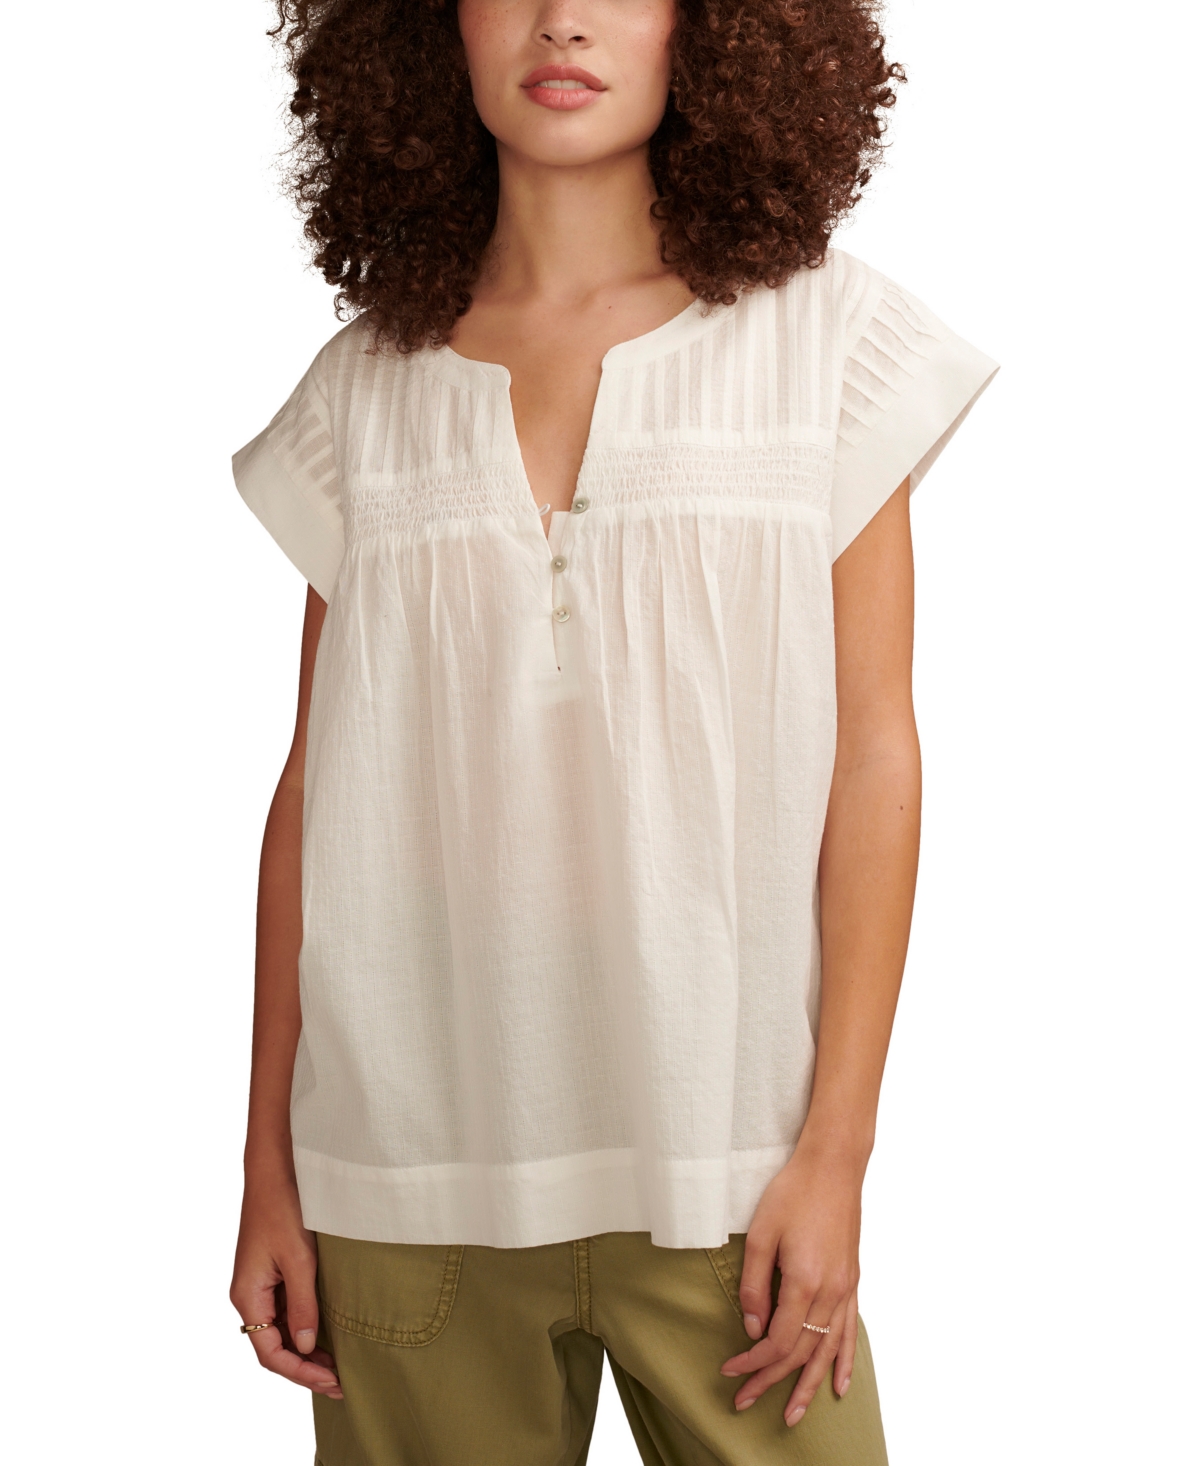 Women's Modern Cotton Popover V-Neck Top - Pale Lime Yellow